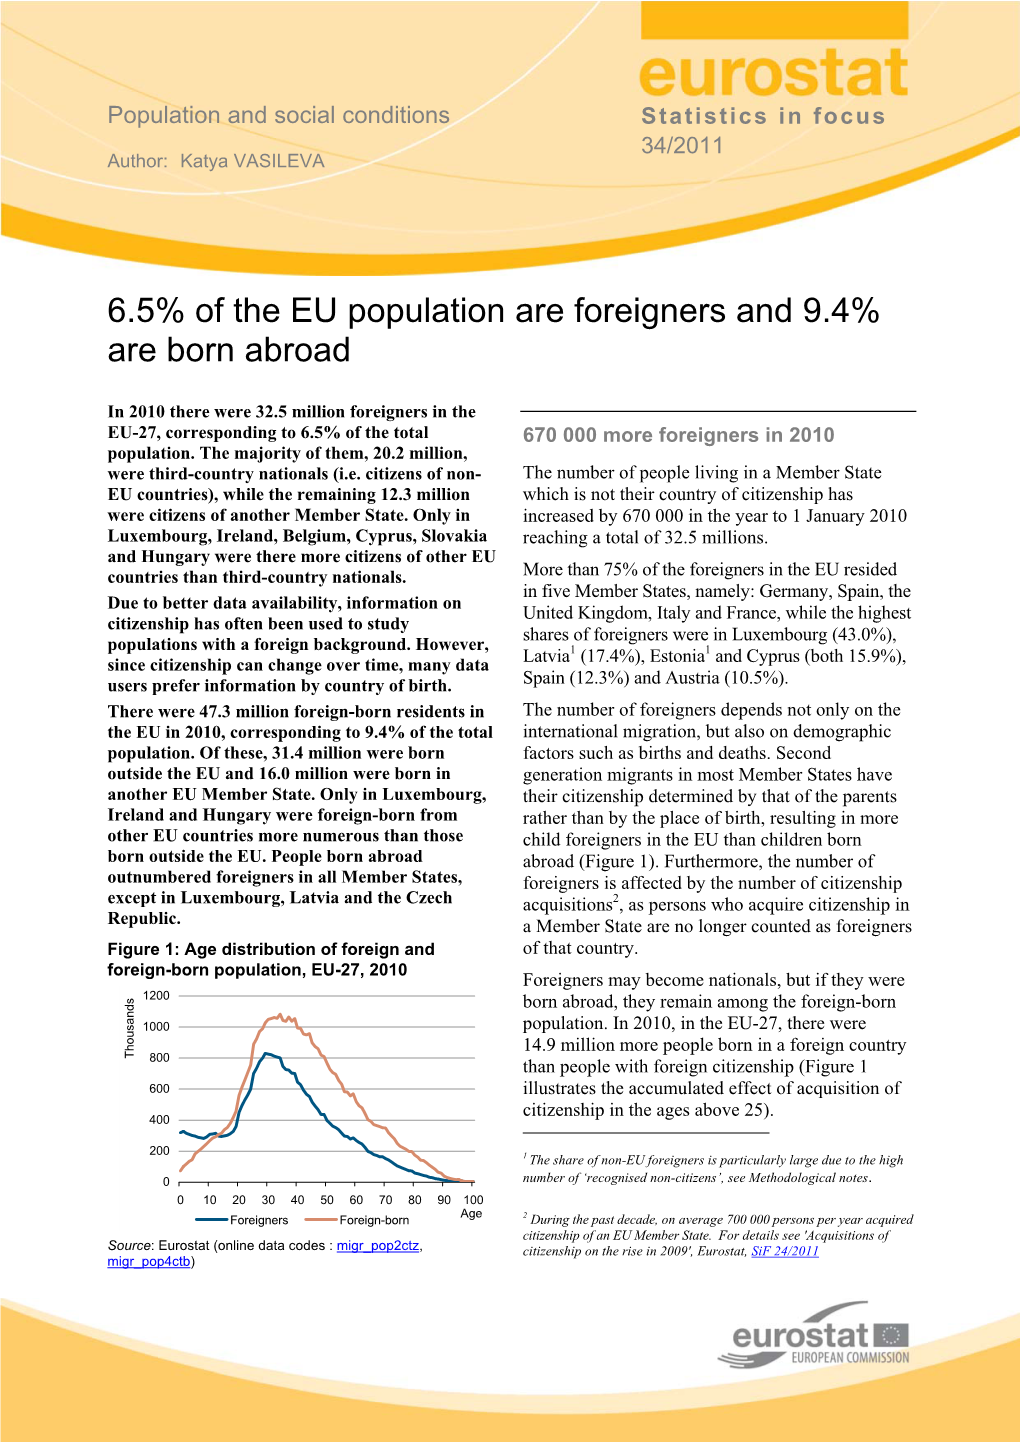 6.5% of the EU Population Are Foreigners and 9.4% Are Born Abroad